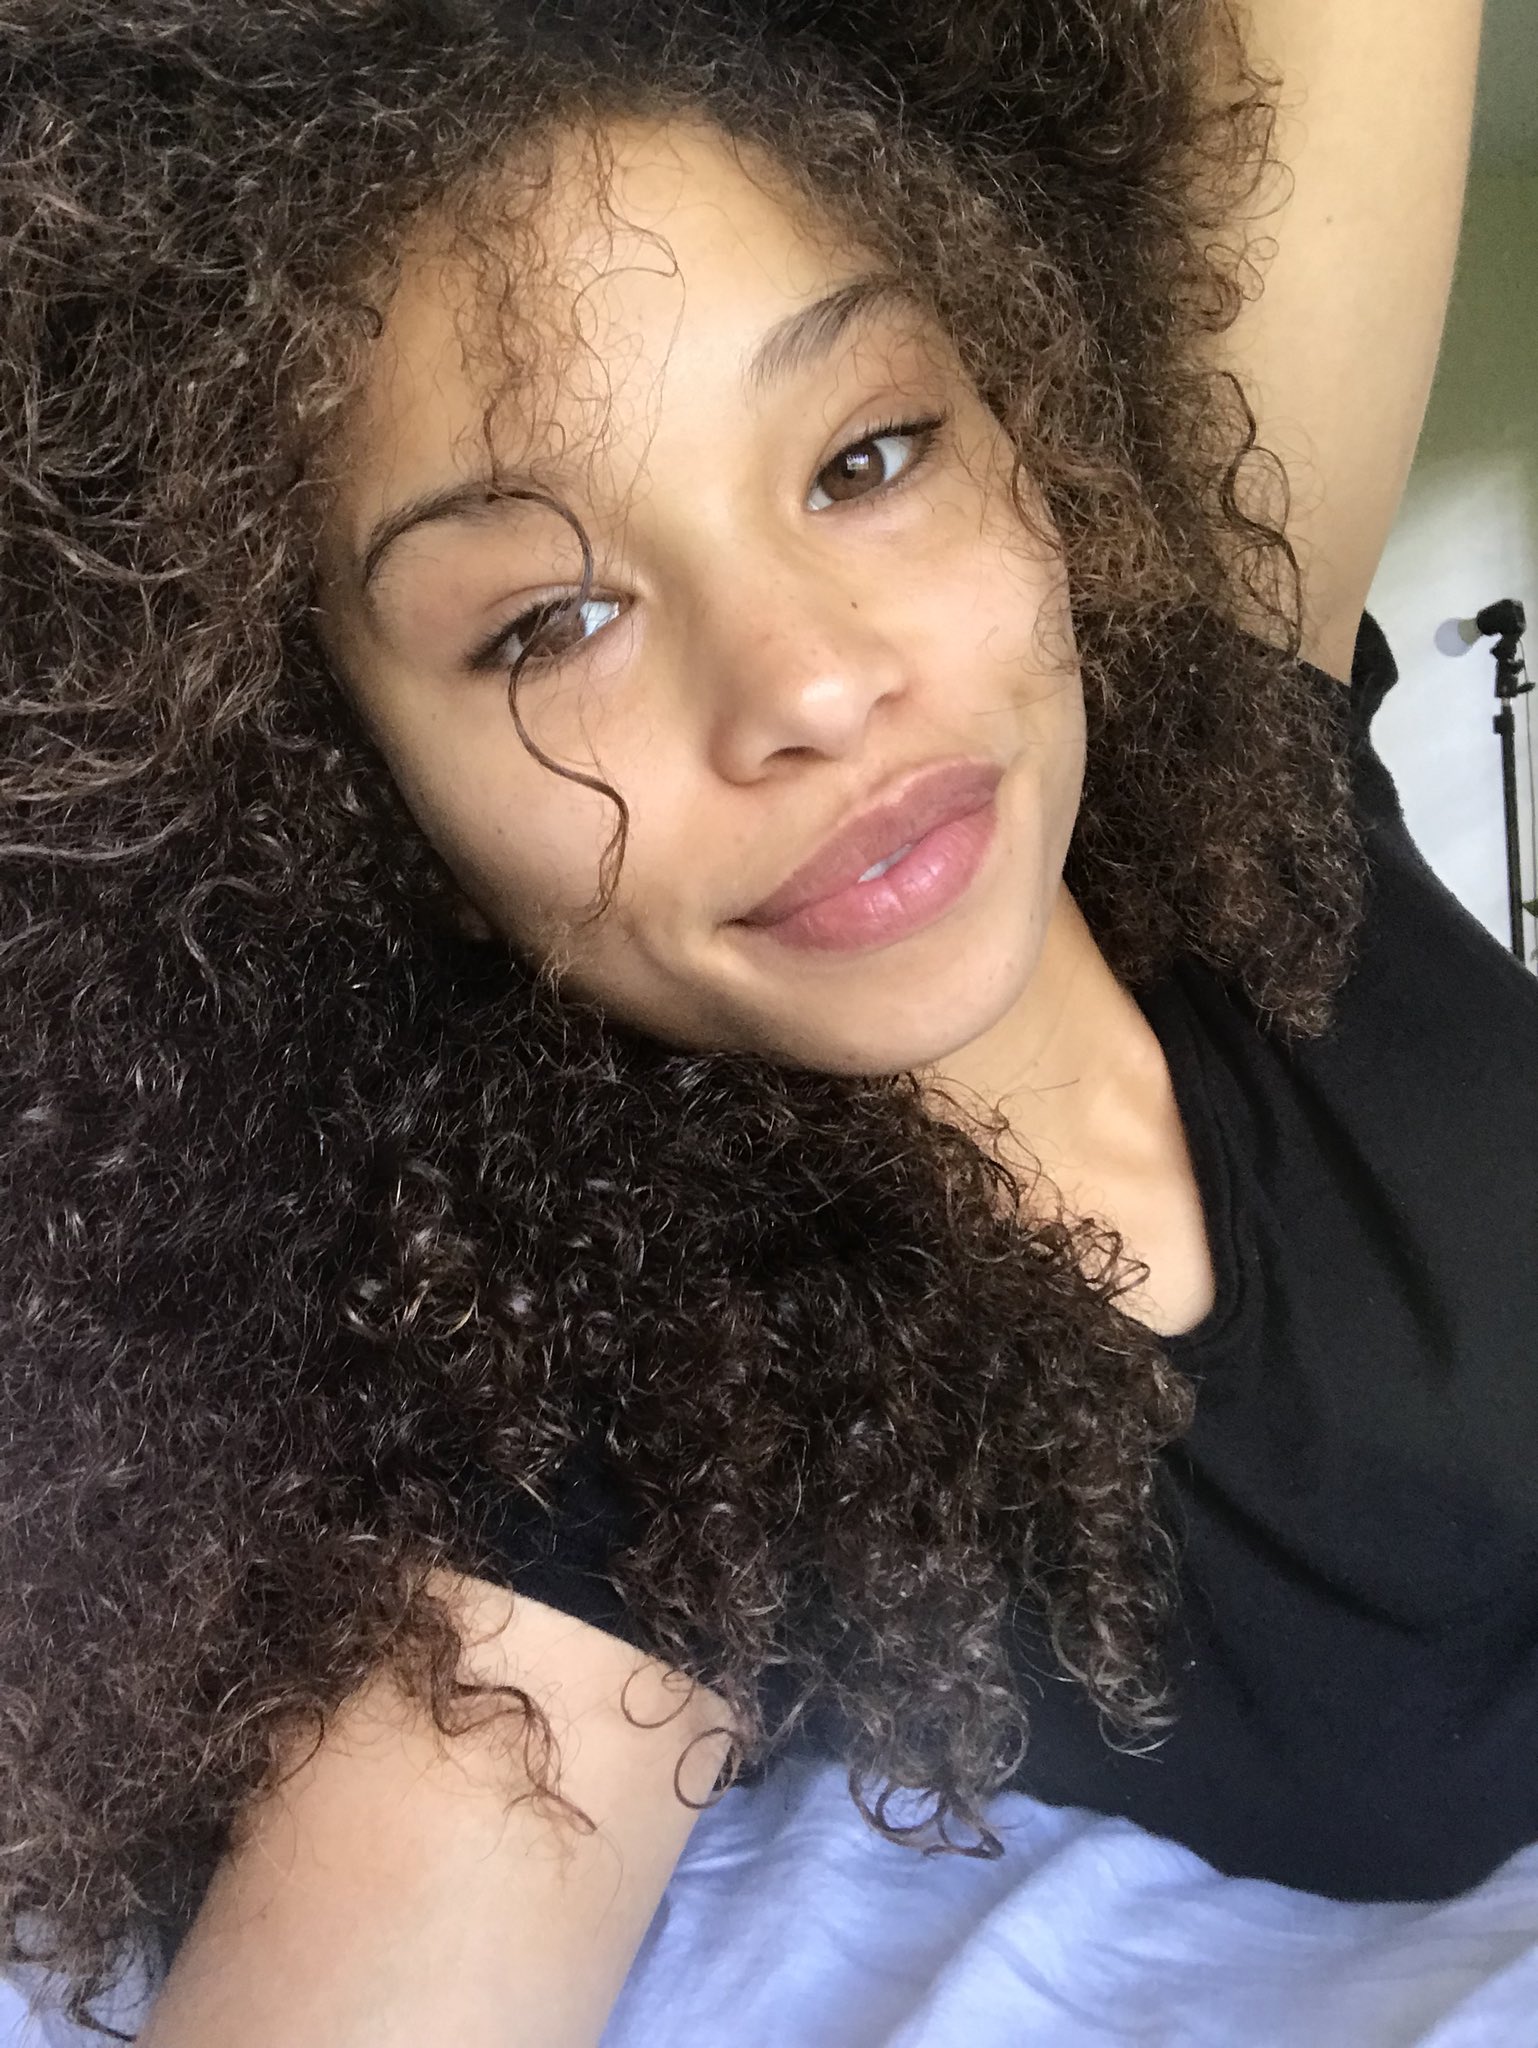 Cecilia Lion ® lóri Twitter: "My curls is poppin' today! 🤗 😍